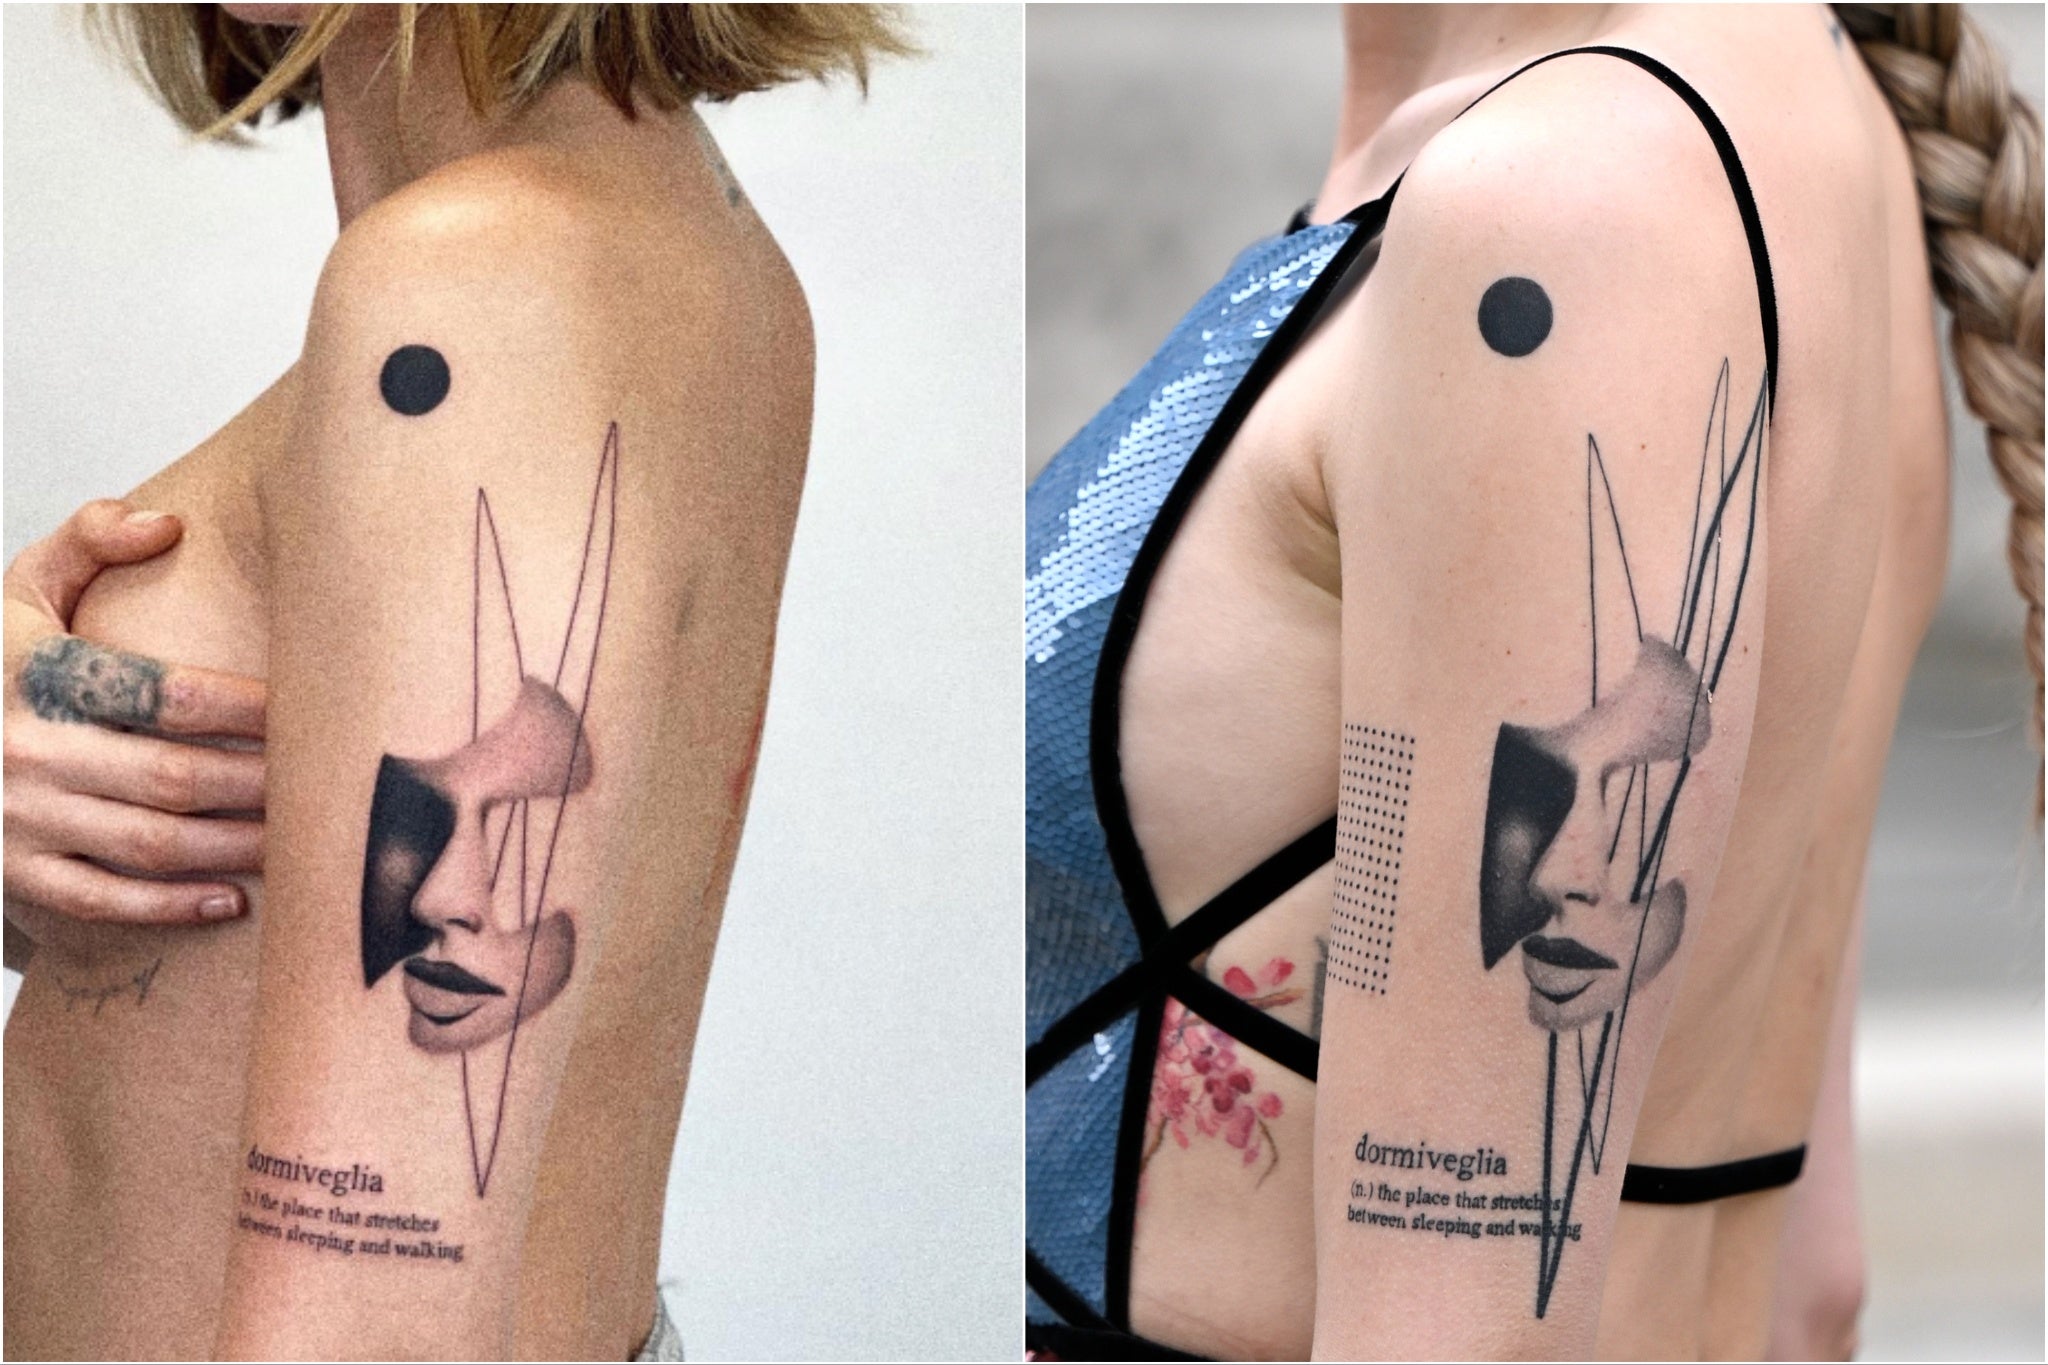 Delevingne’s tattoo before and after the correction